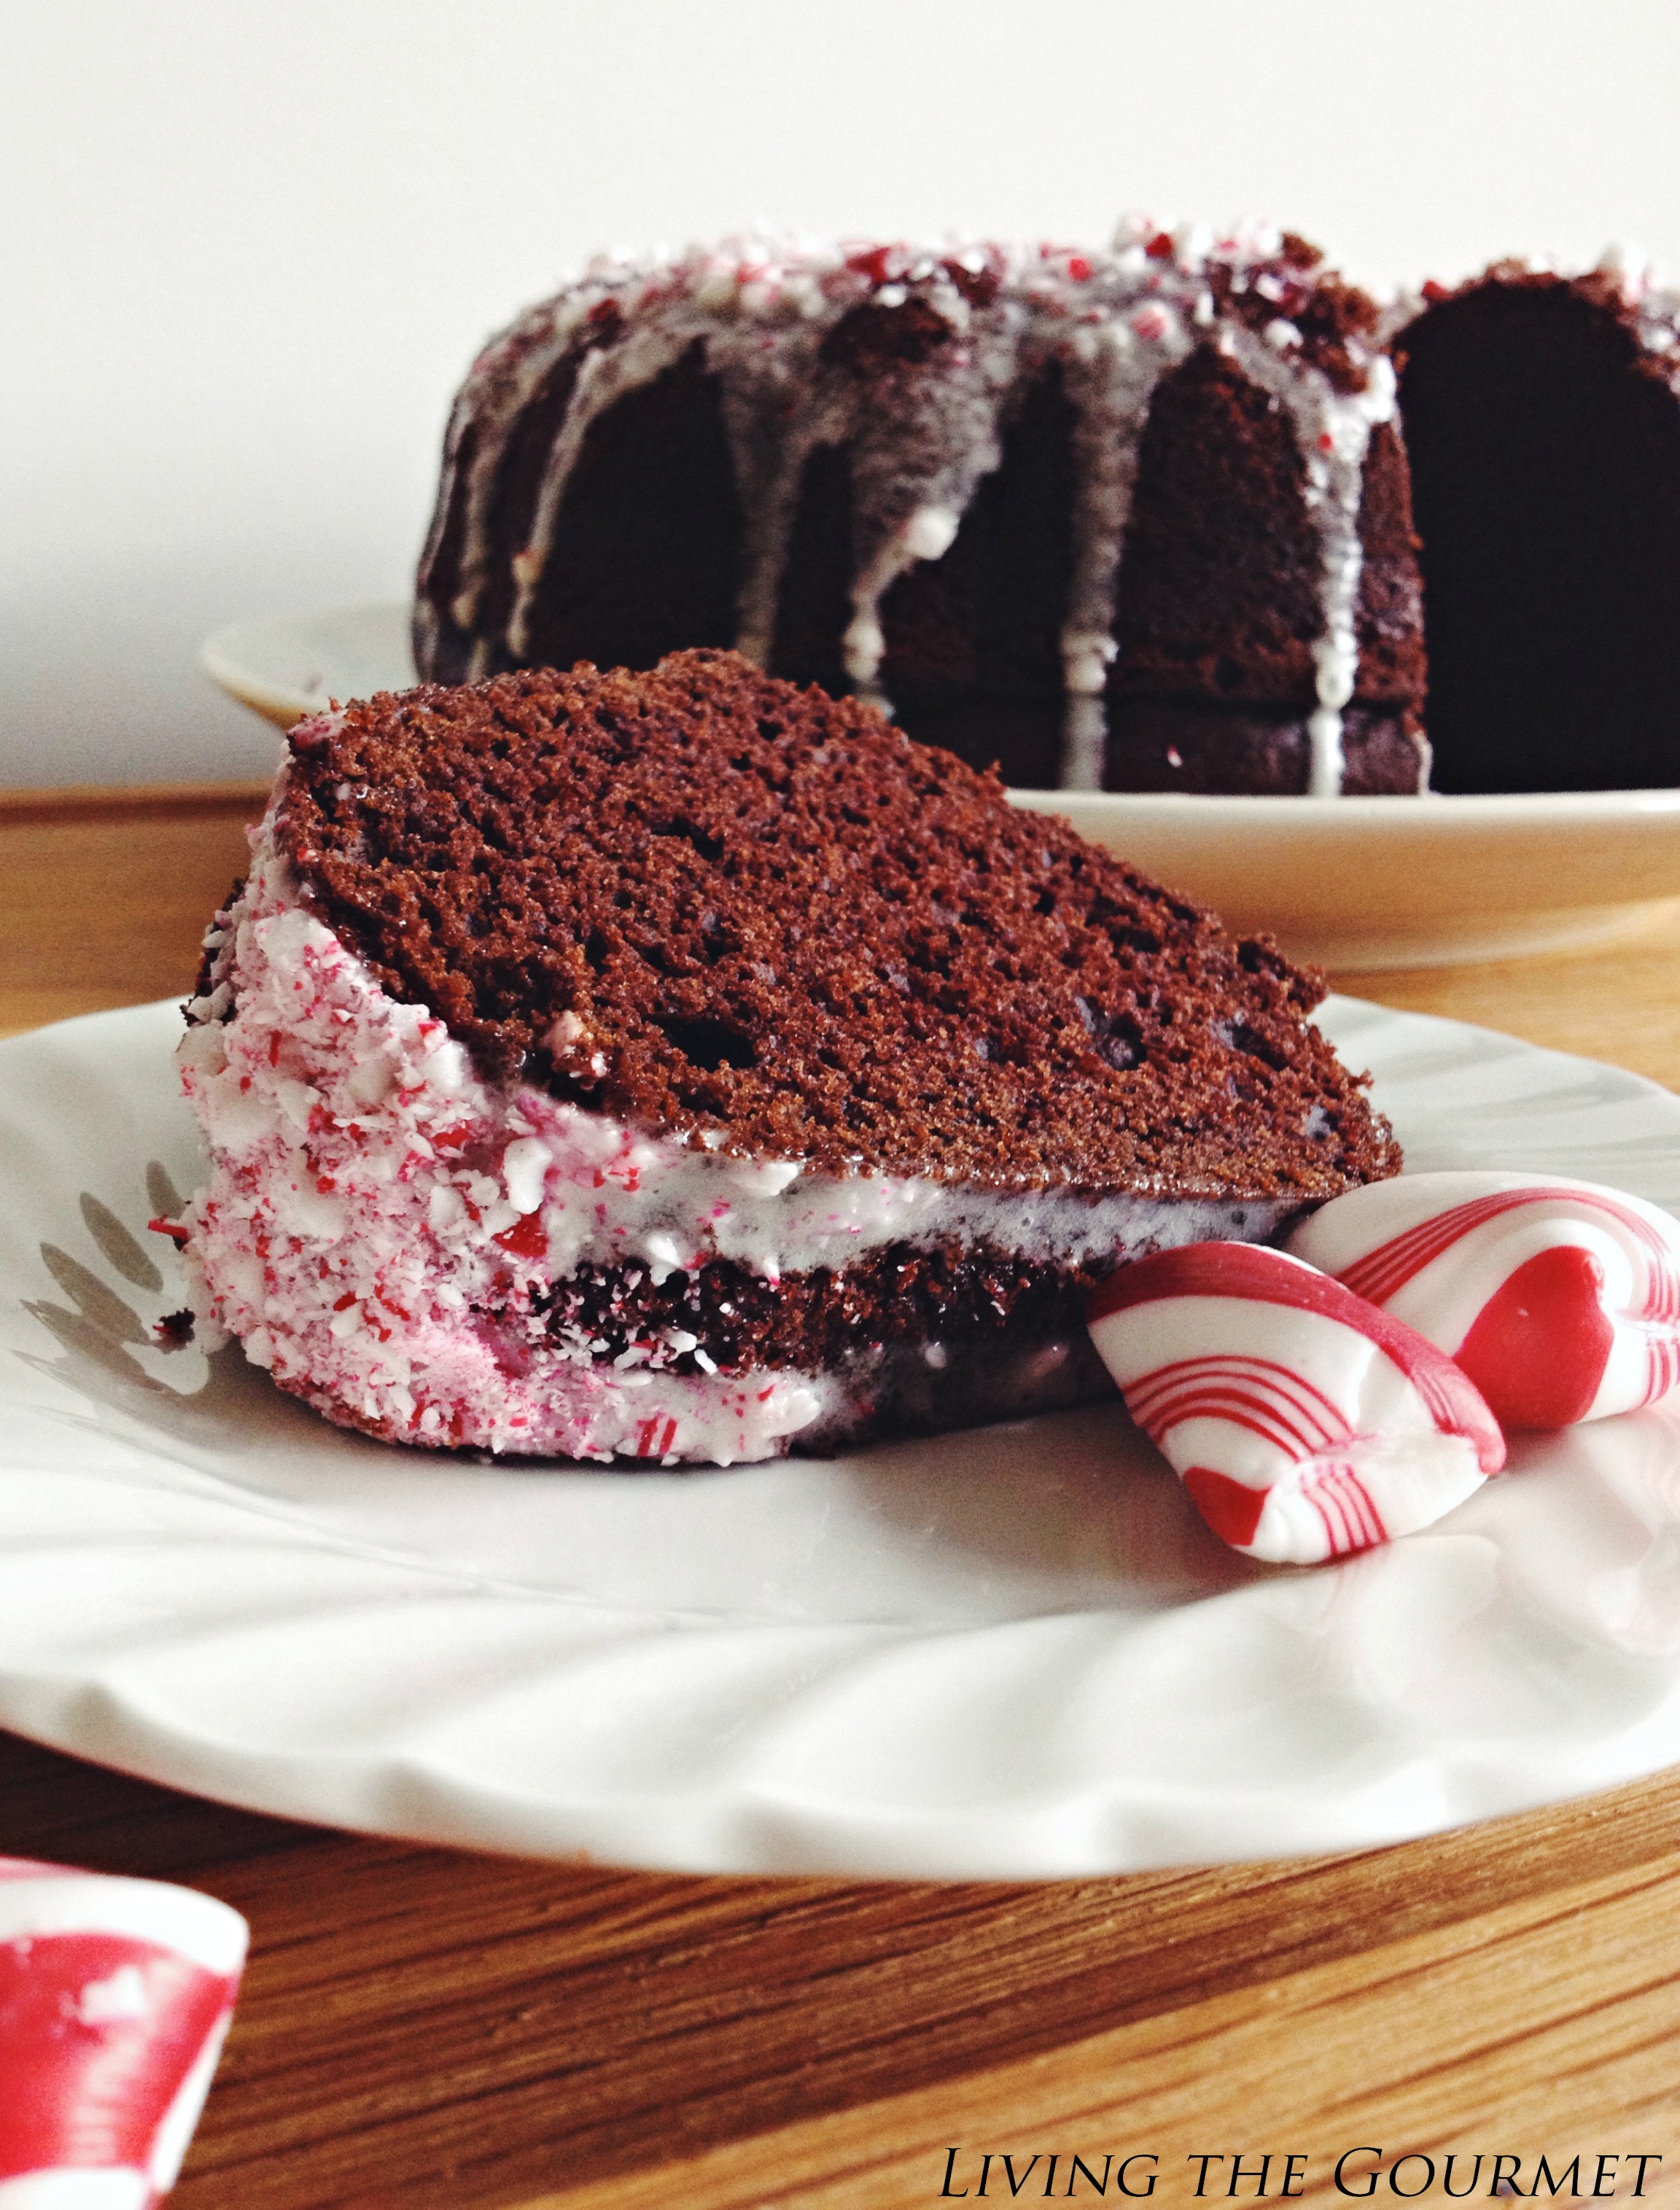 Living the Gourmet: Chocolate Cake w/ Eggnog & Peppermint Drizzle #BundtBakers